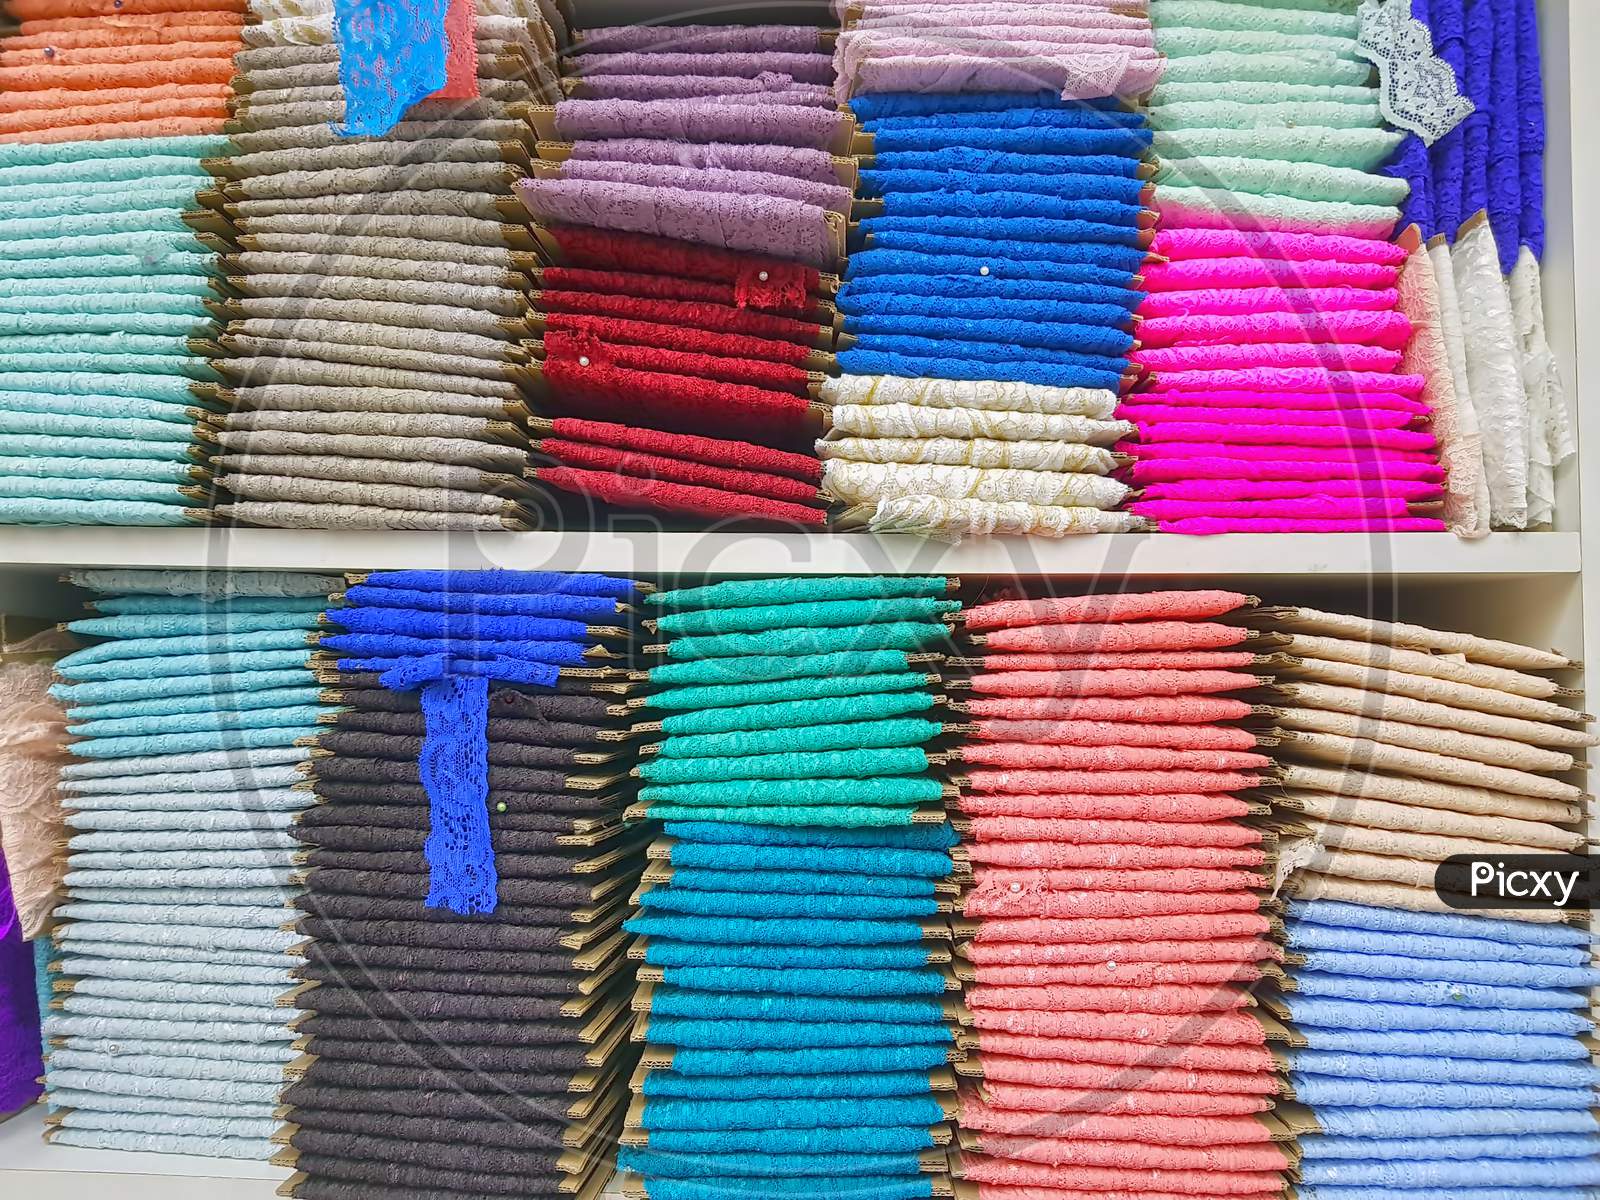 Traditional Lace Fabric For Sale, In The Market